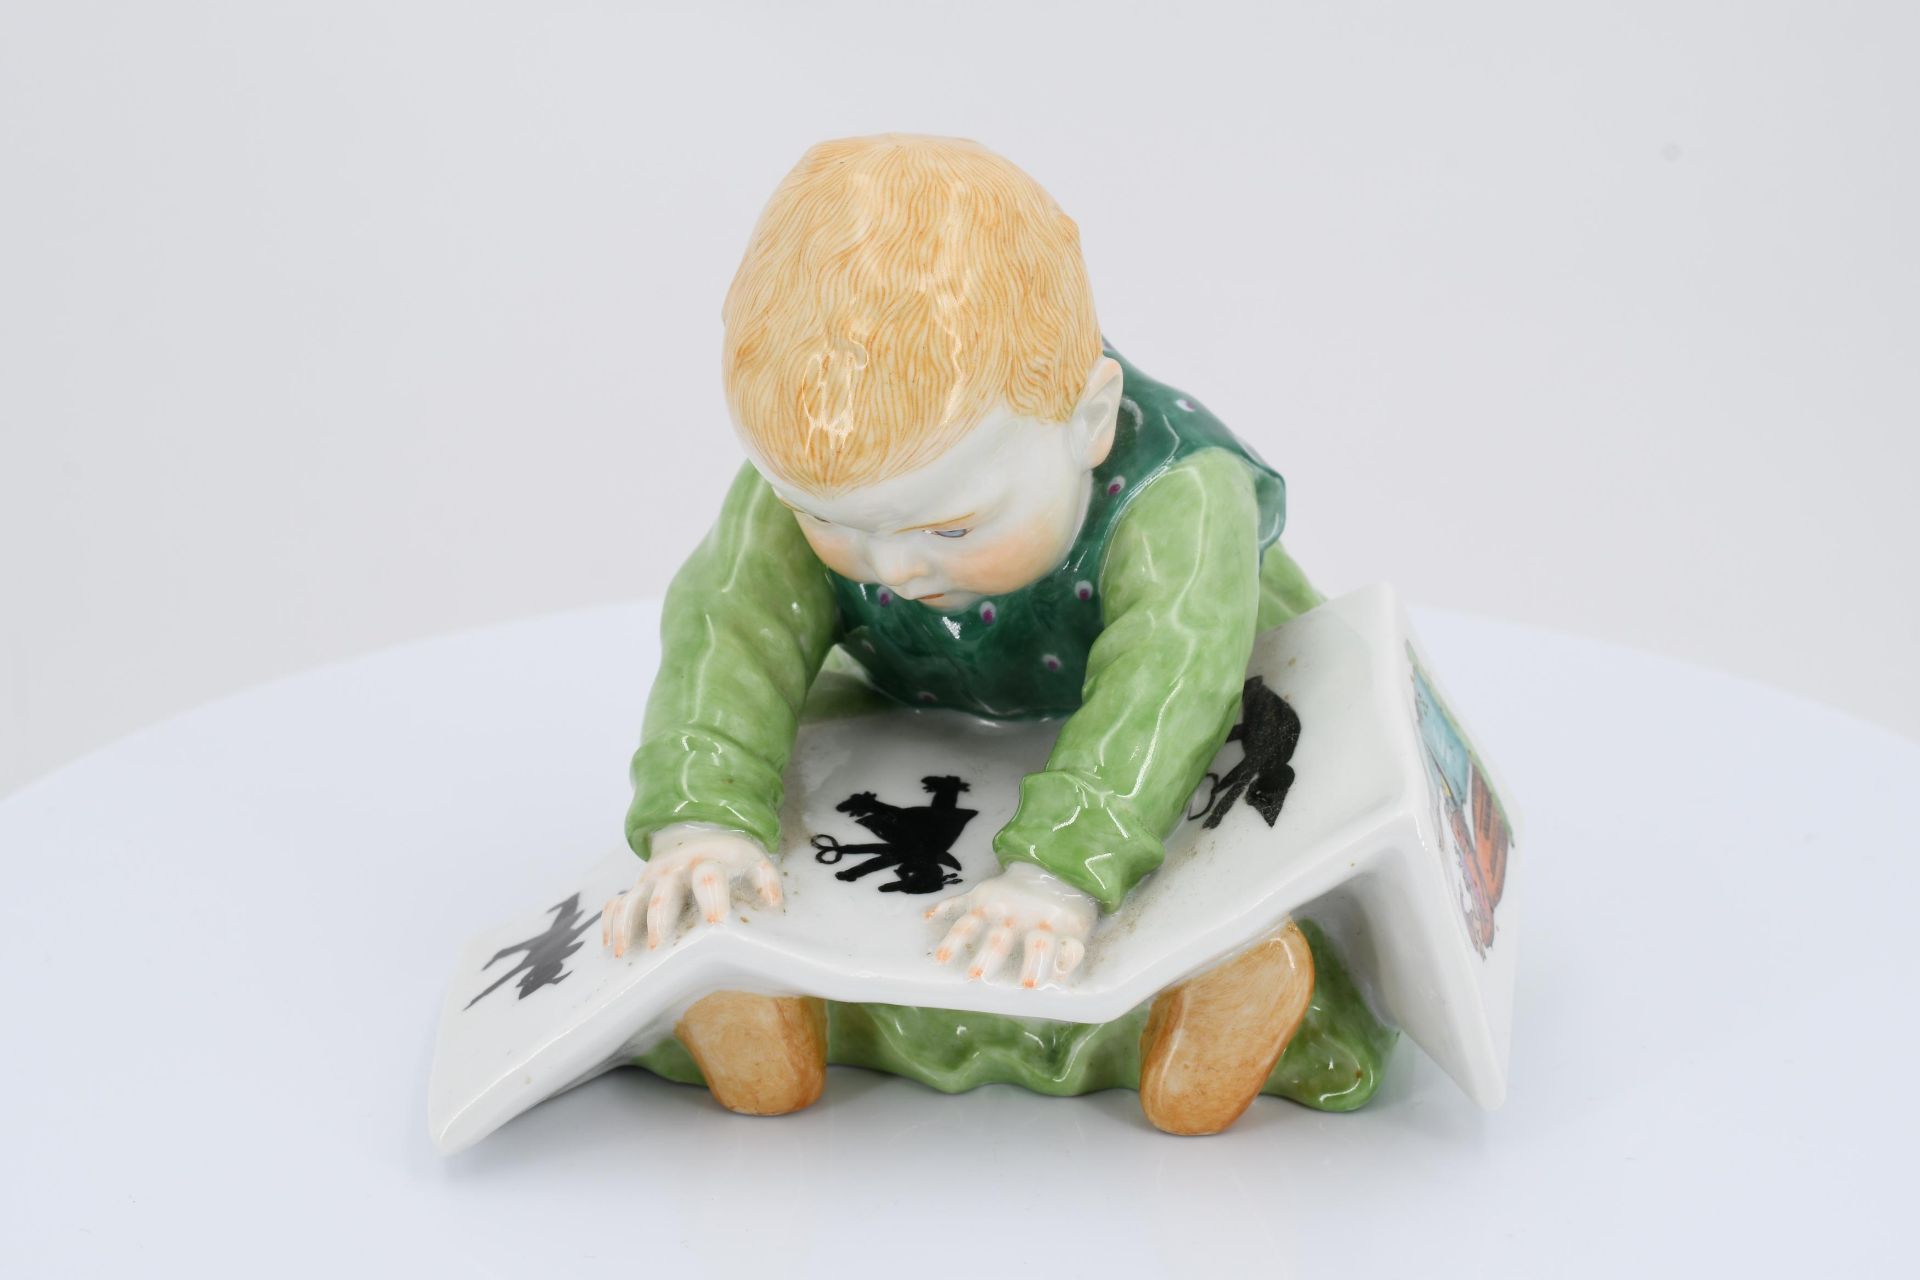 Porcelain figurine of child with storybook - Image 2 of 6